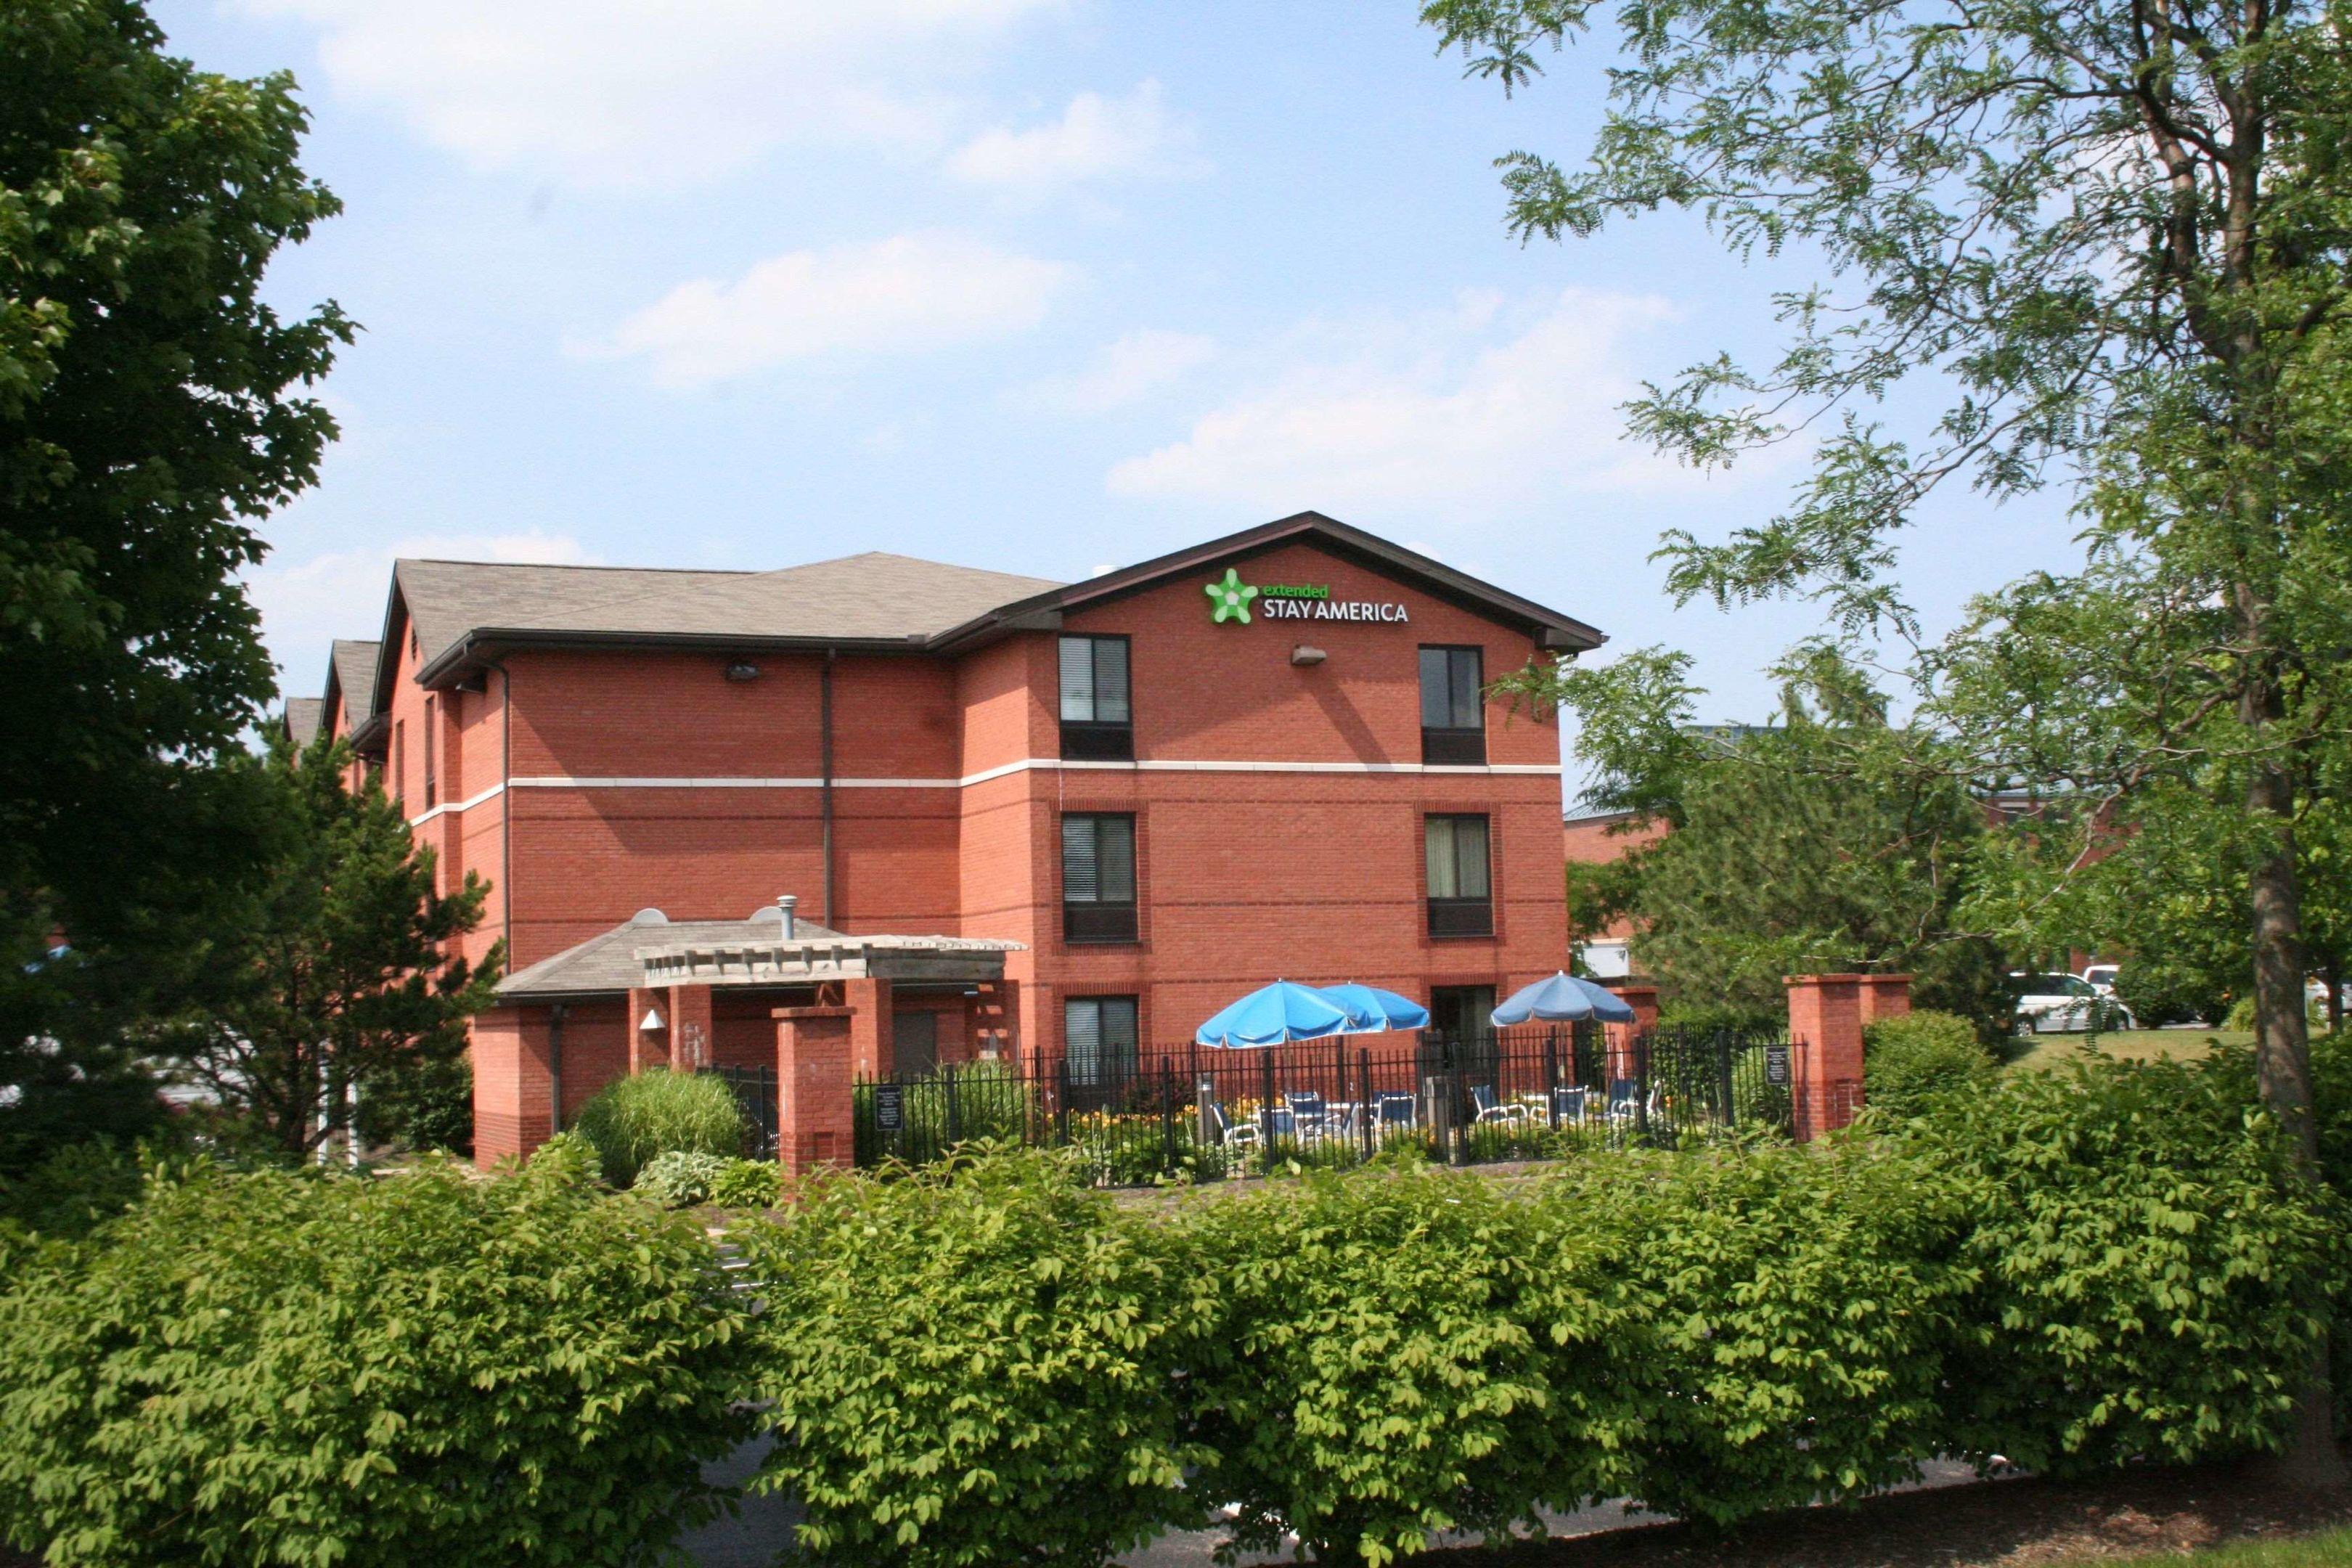 Extended Stay America - Cleveland - Middleburg Heights, OH